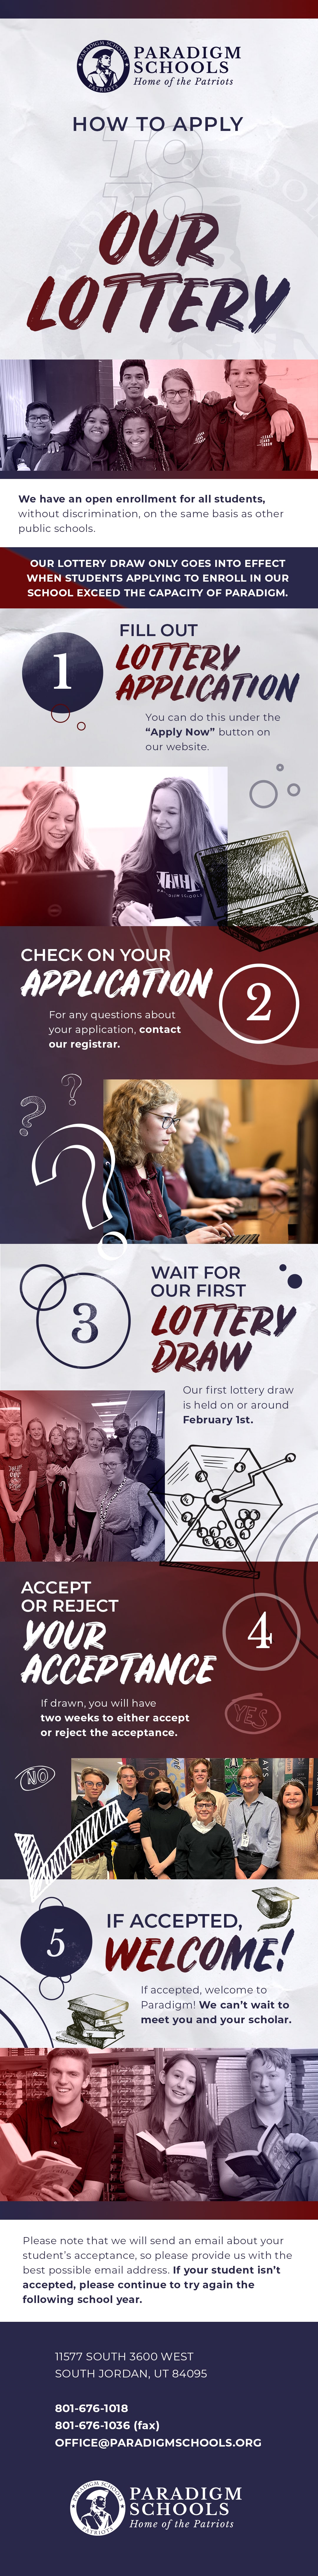 charter school lottery infographic